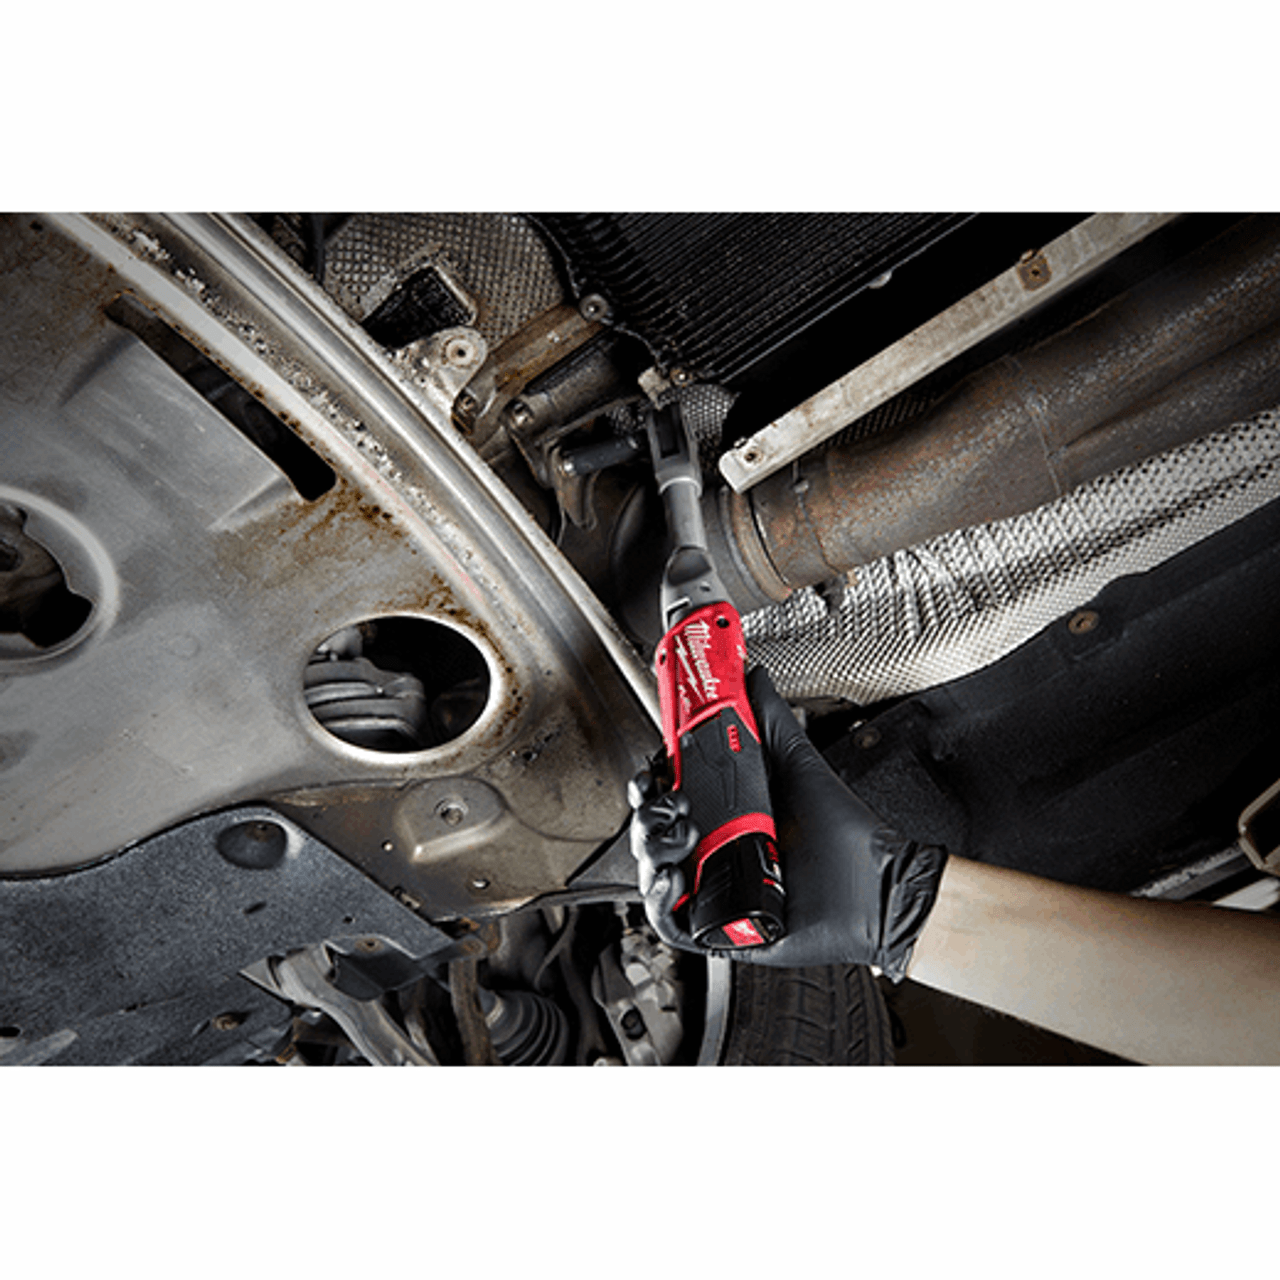 M12 FUEL™ 3/8 in. Extended Reach Ratchet